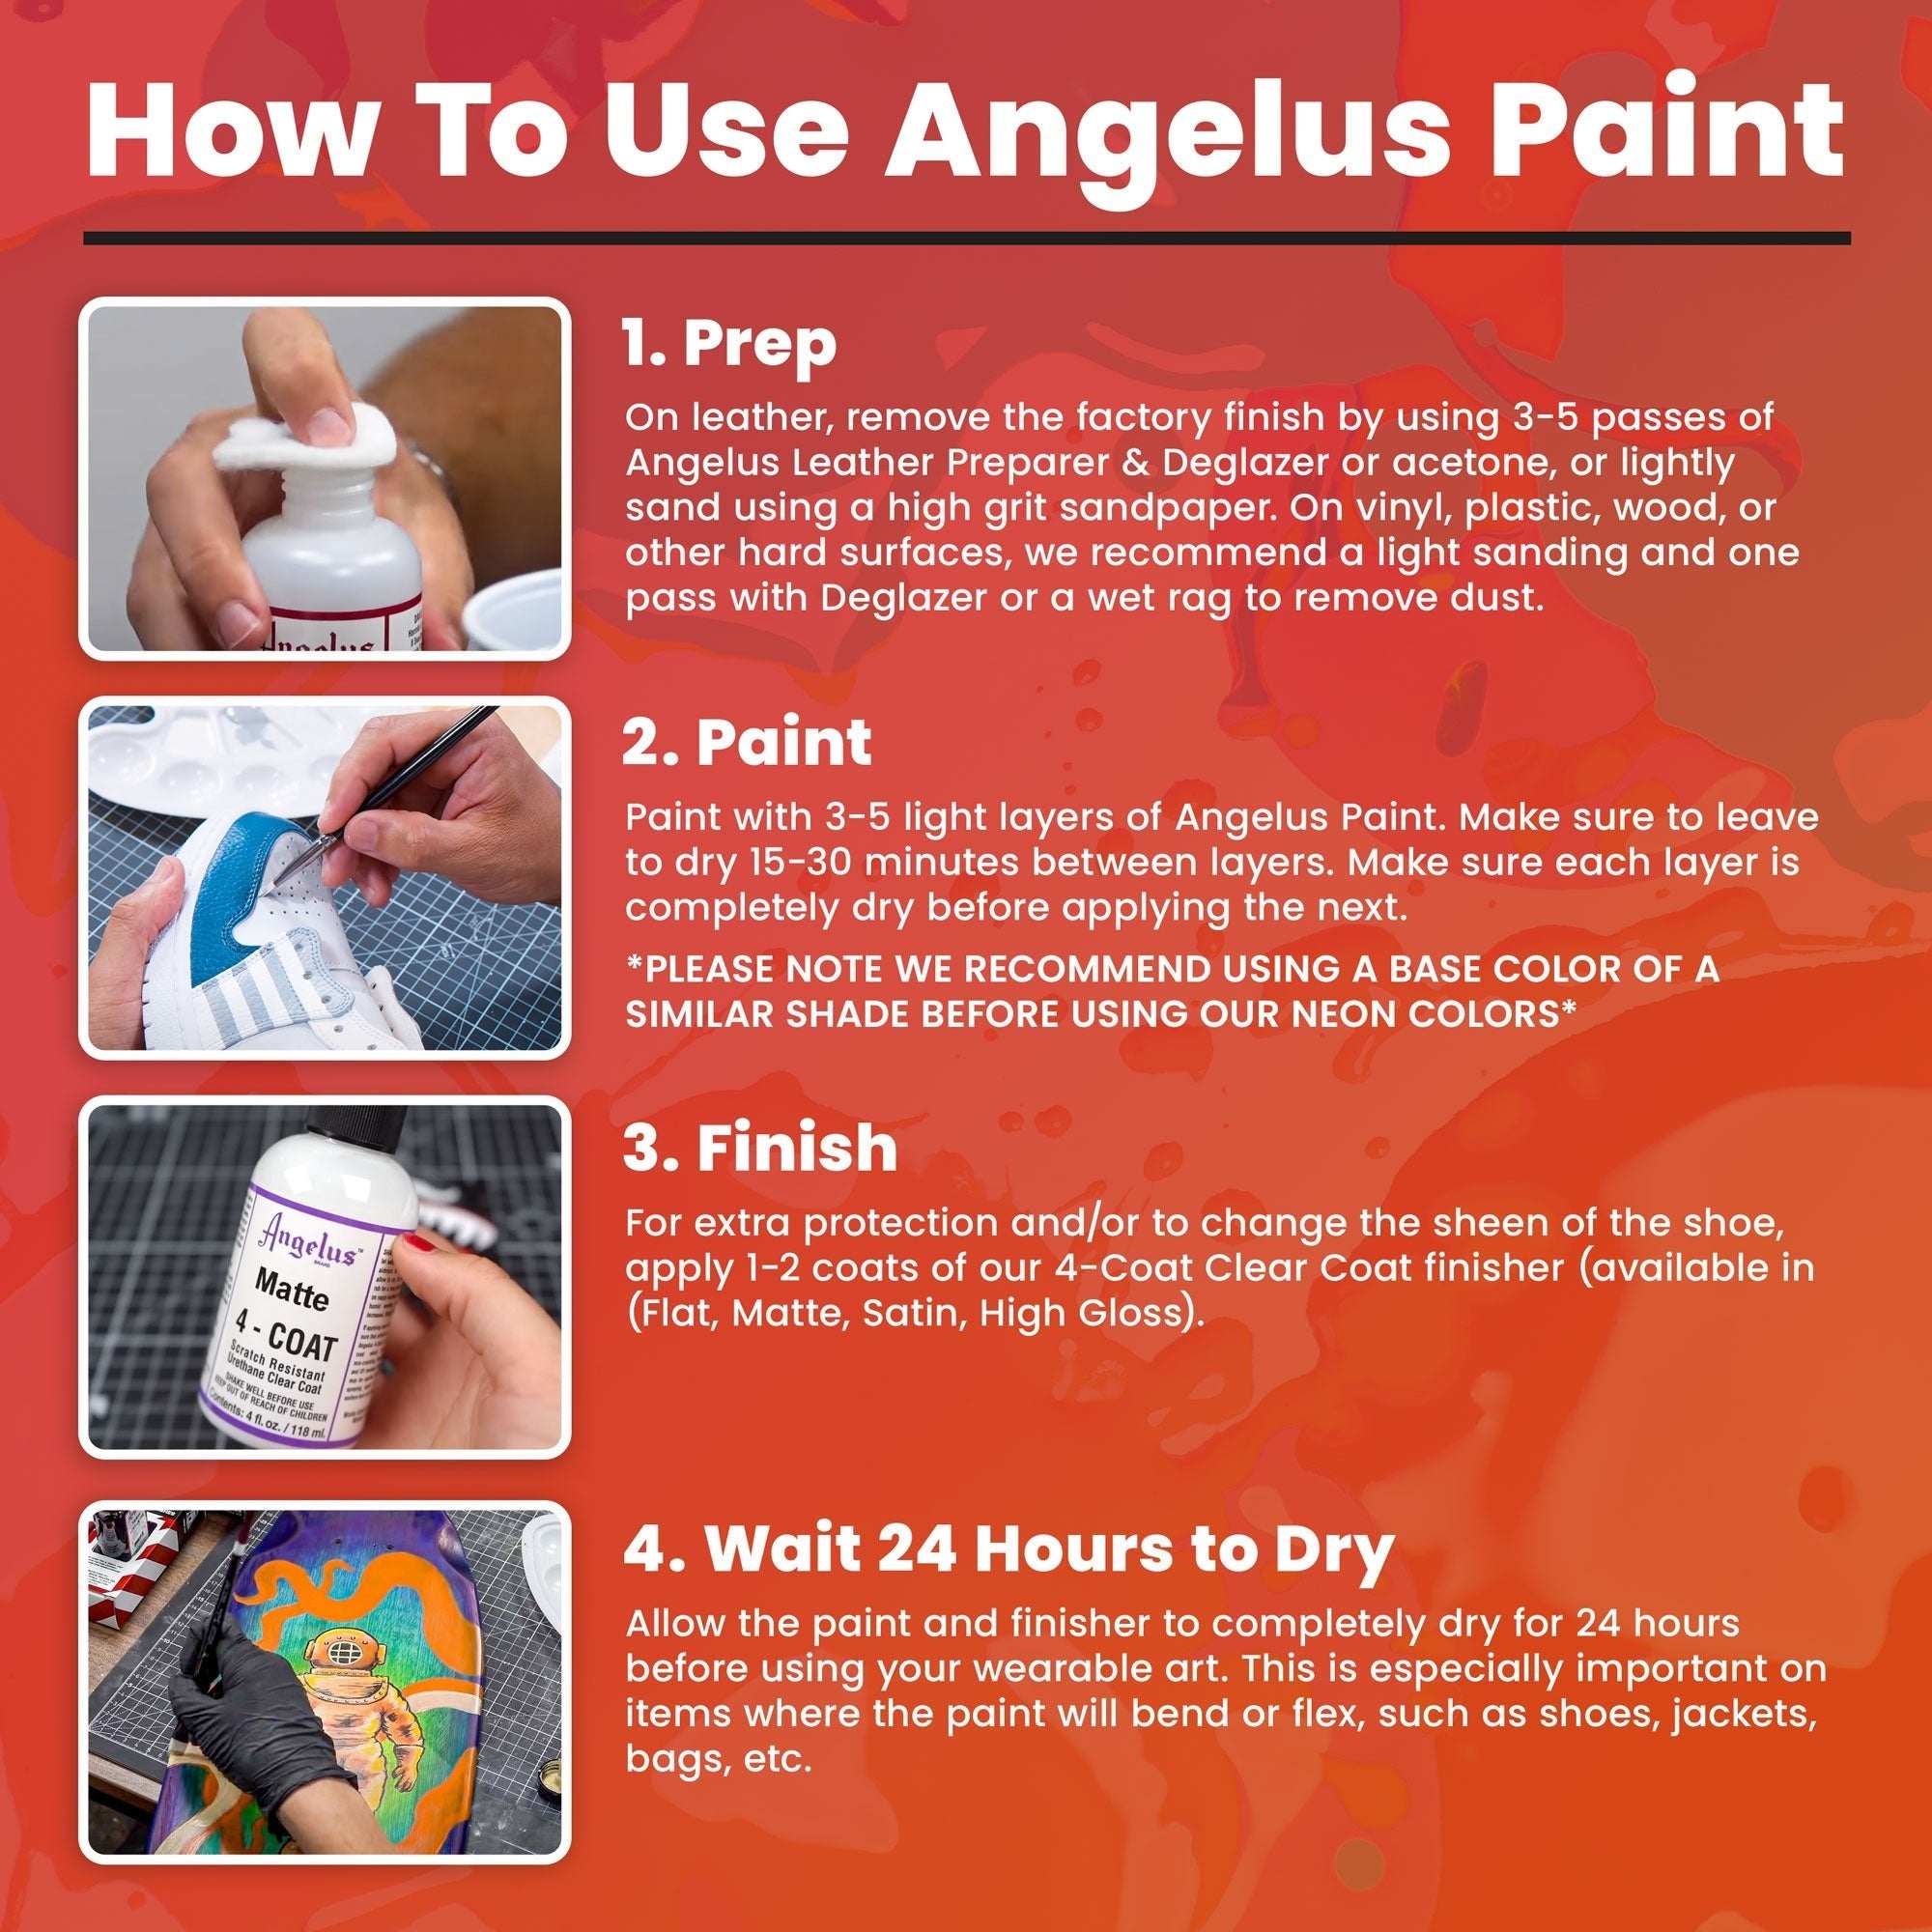 Angelus Pearlescent Sterling Silver Paint - Angelus Direct